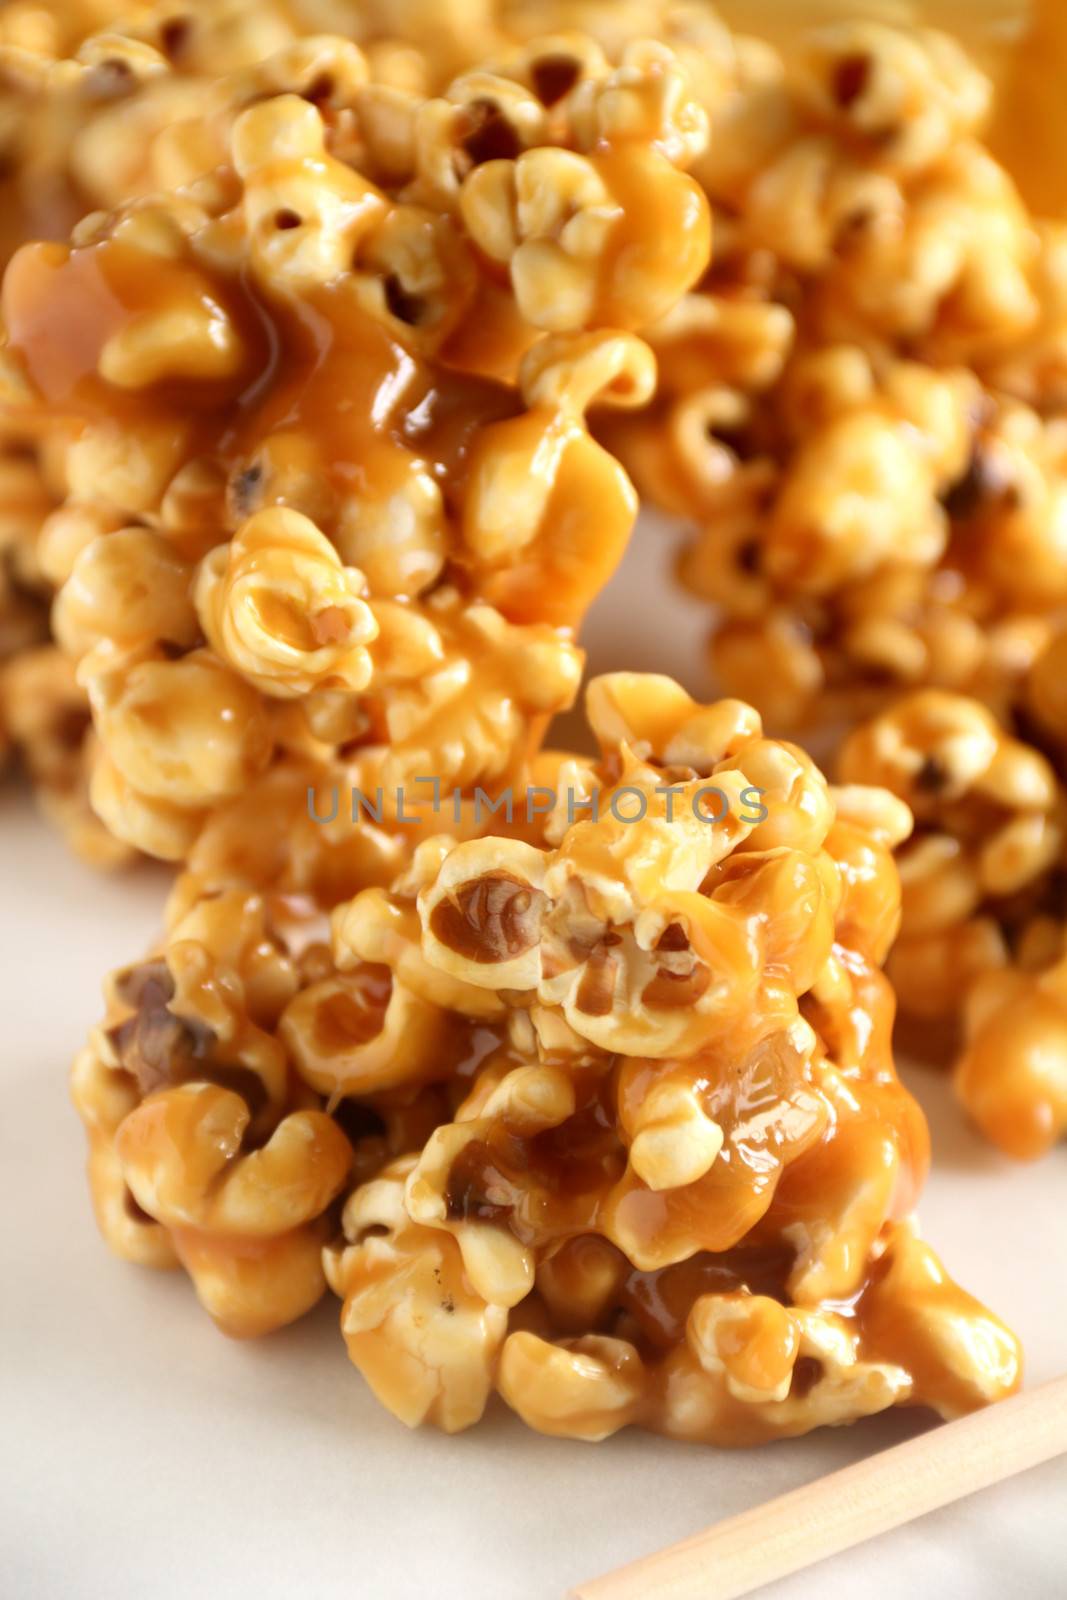 Delicious sweet and crunchy caramel popcorn ready to serve.